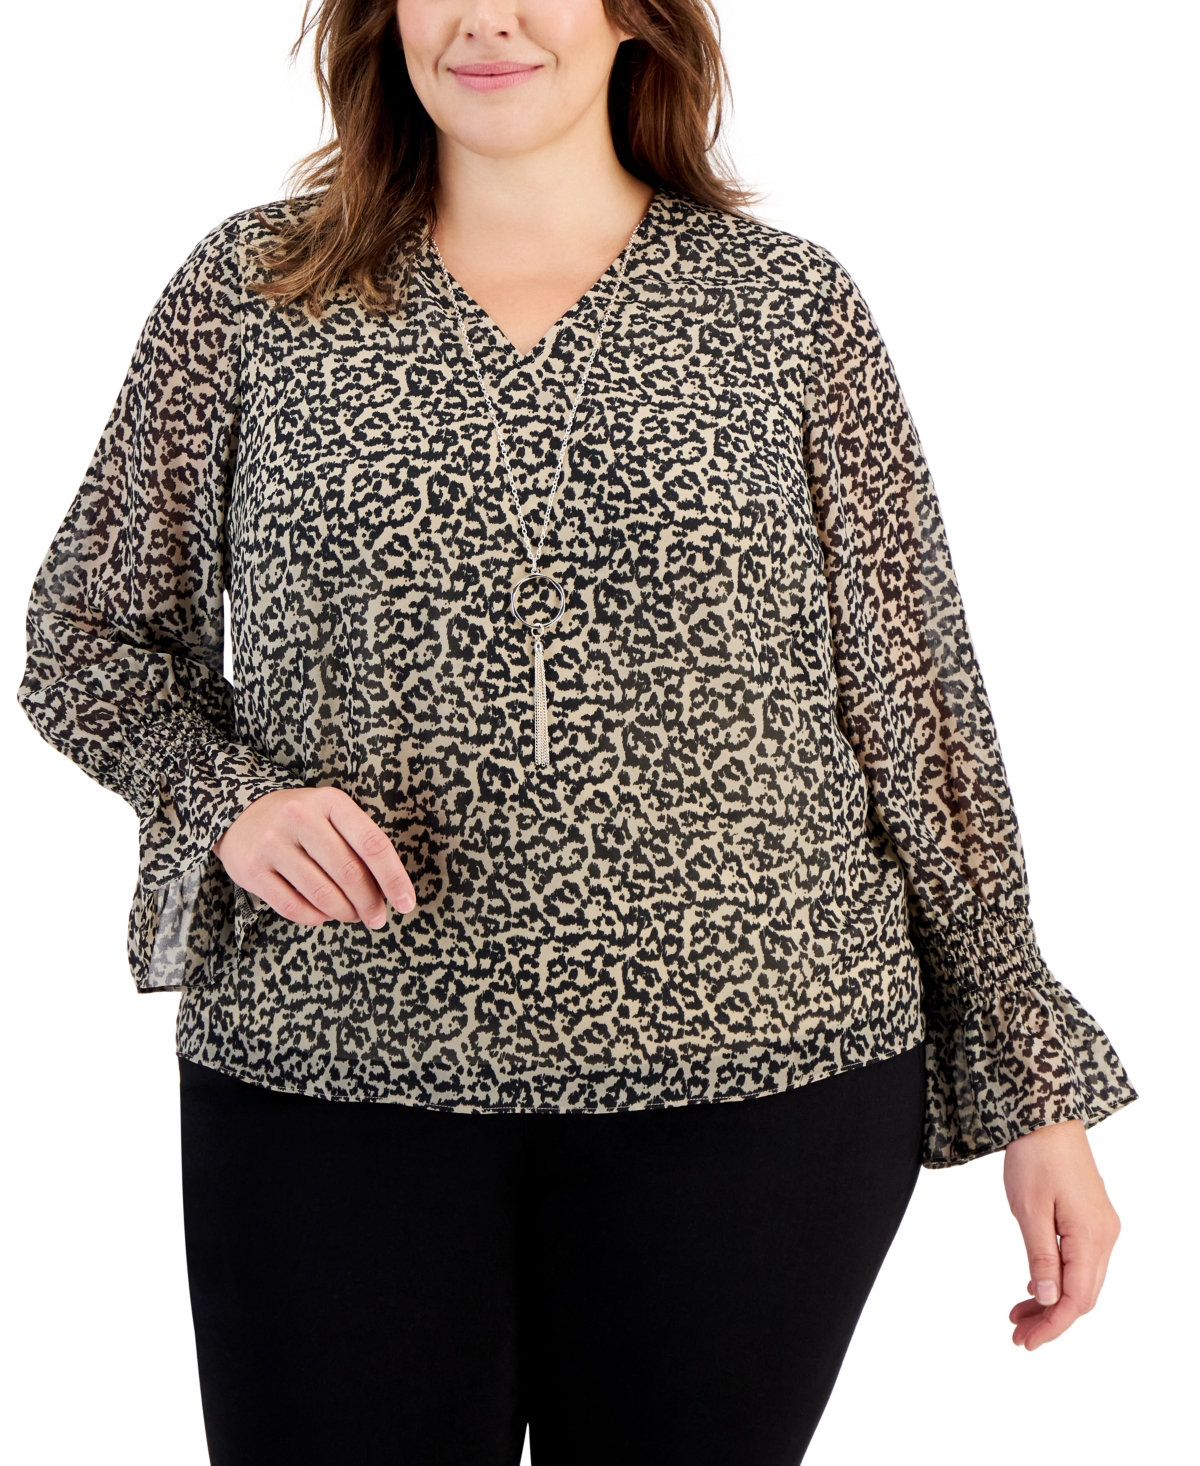 Jm Collection Plus Size Printed Smocked-Sleeve Necklace Top, Created for Macy's